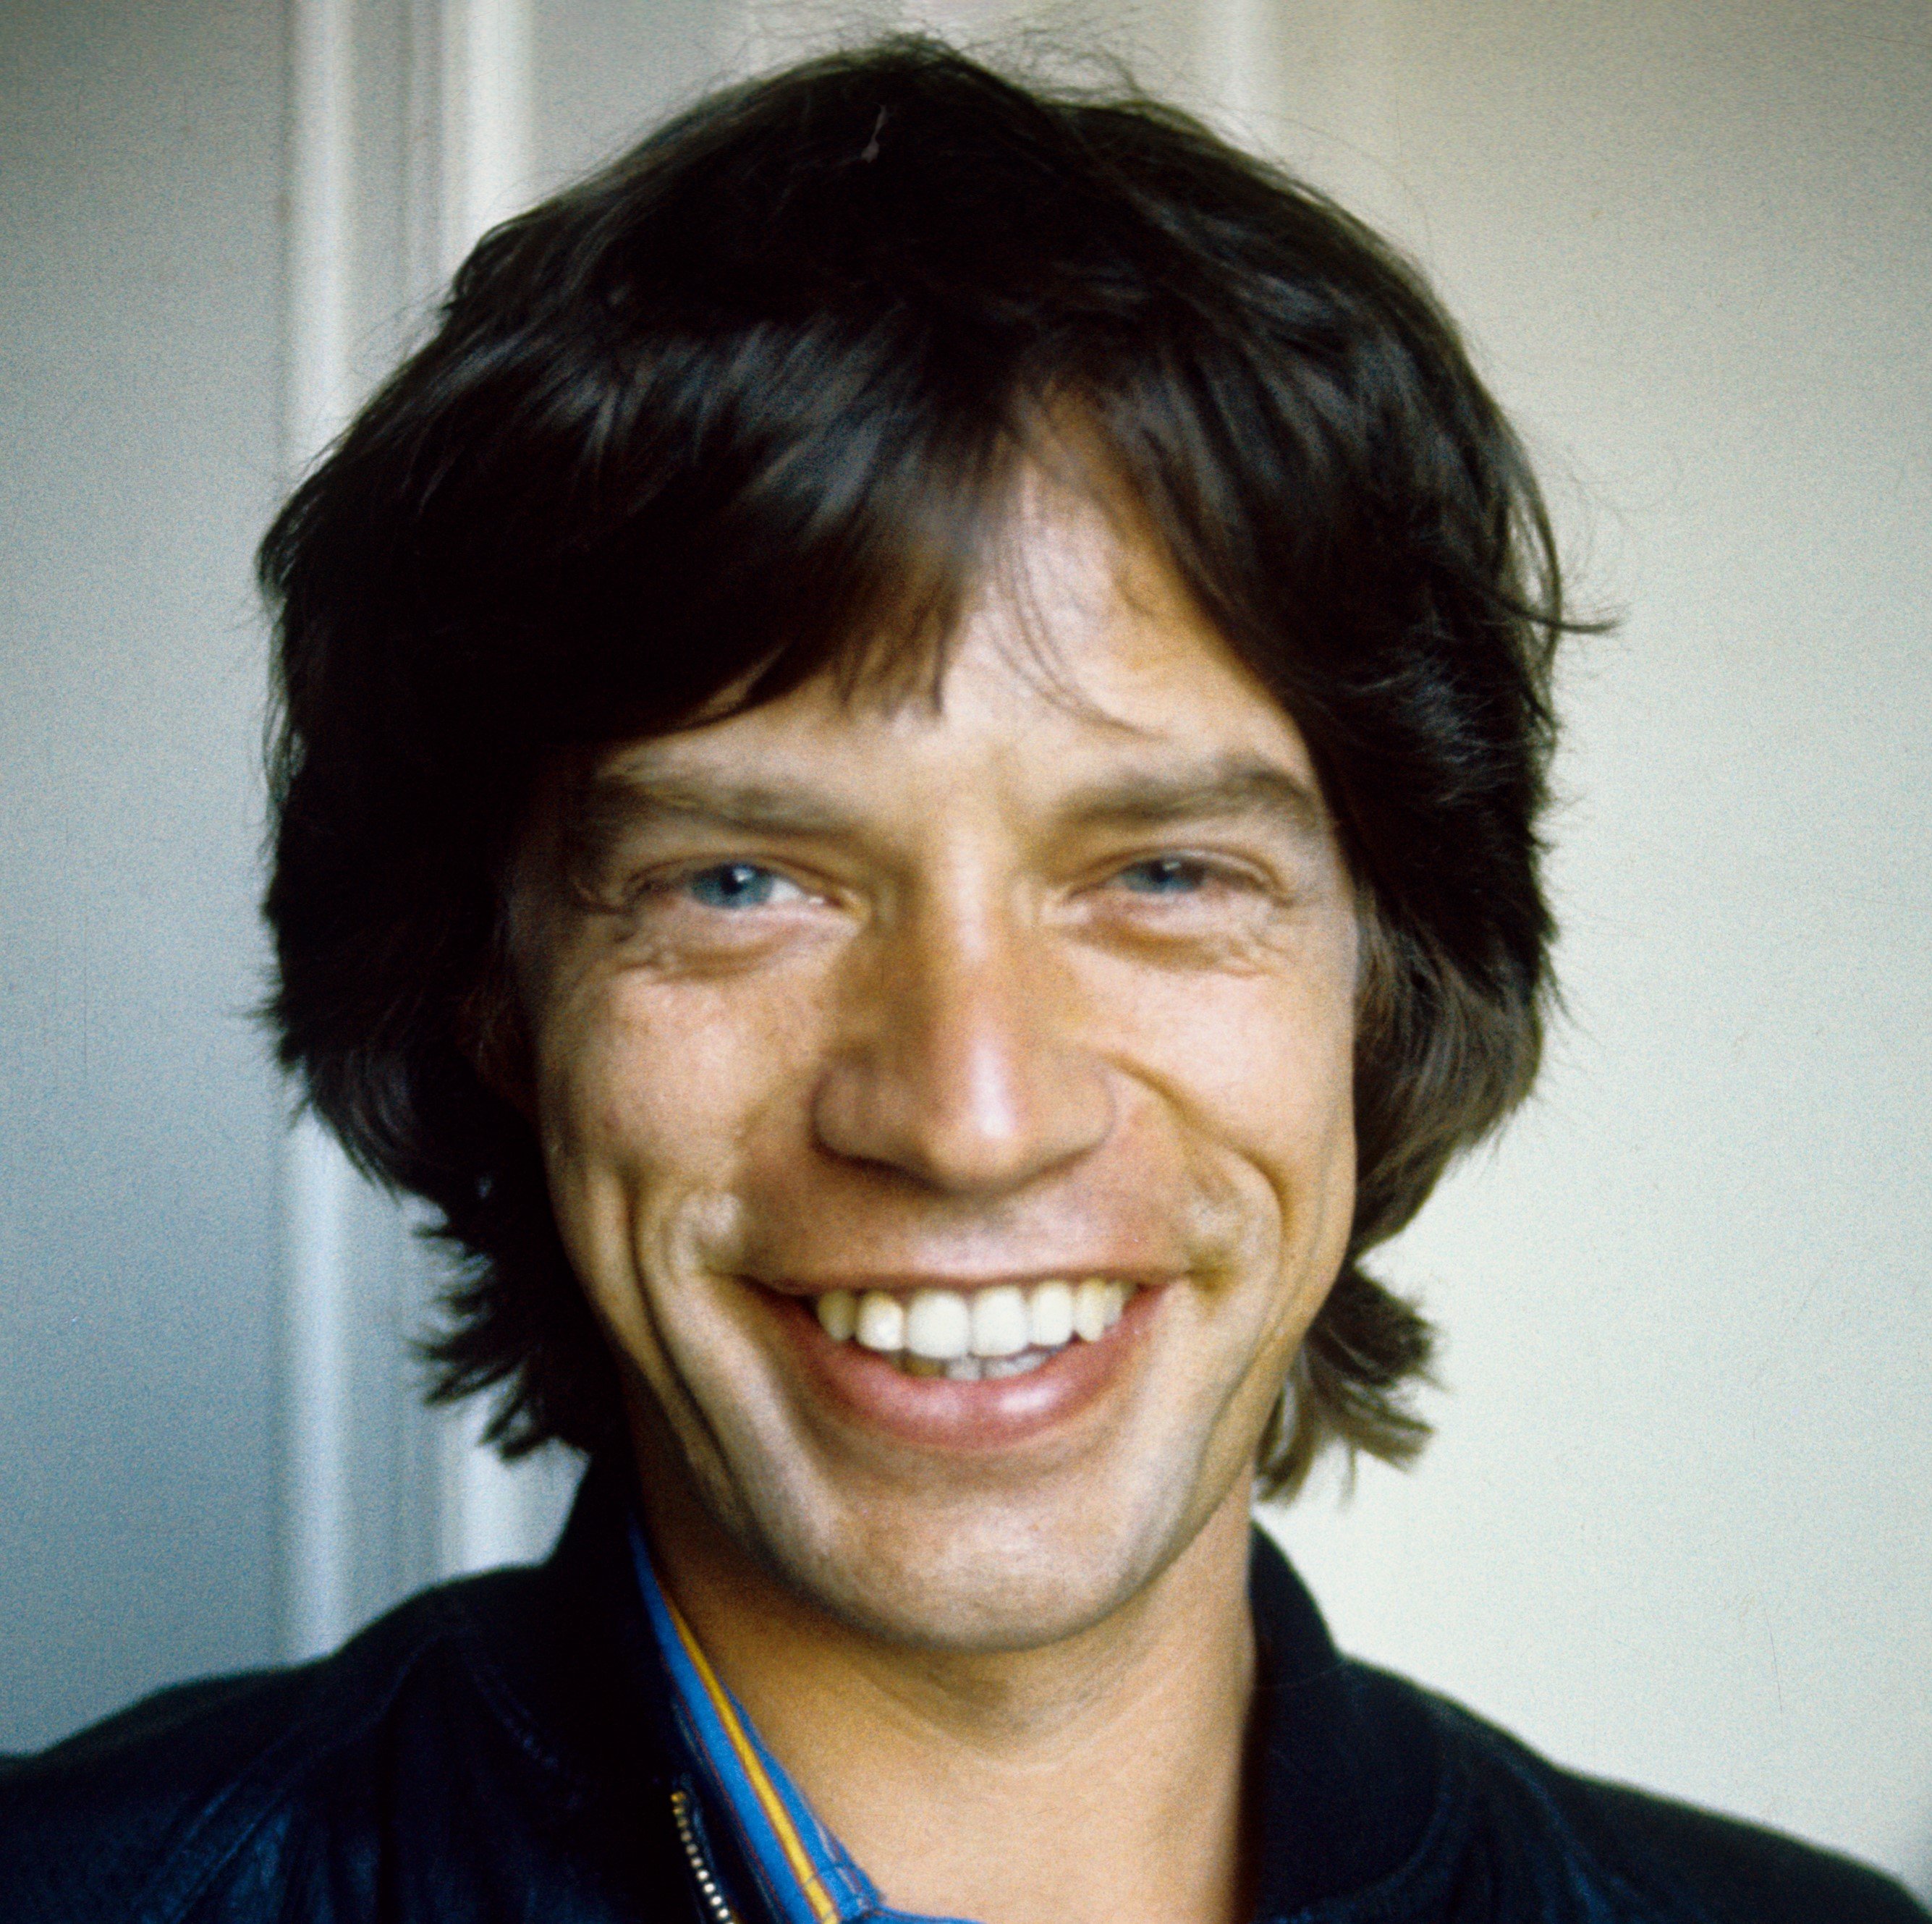 The Rolling Stones' Mick Jagger smiling